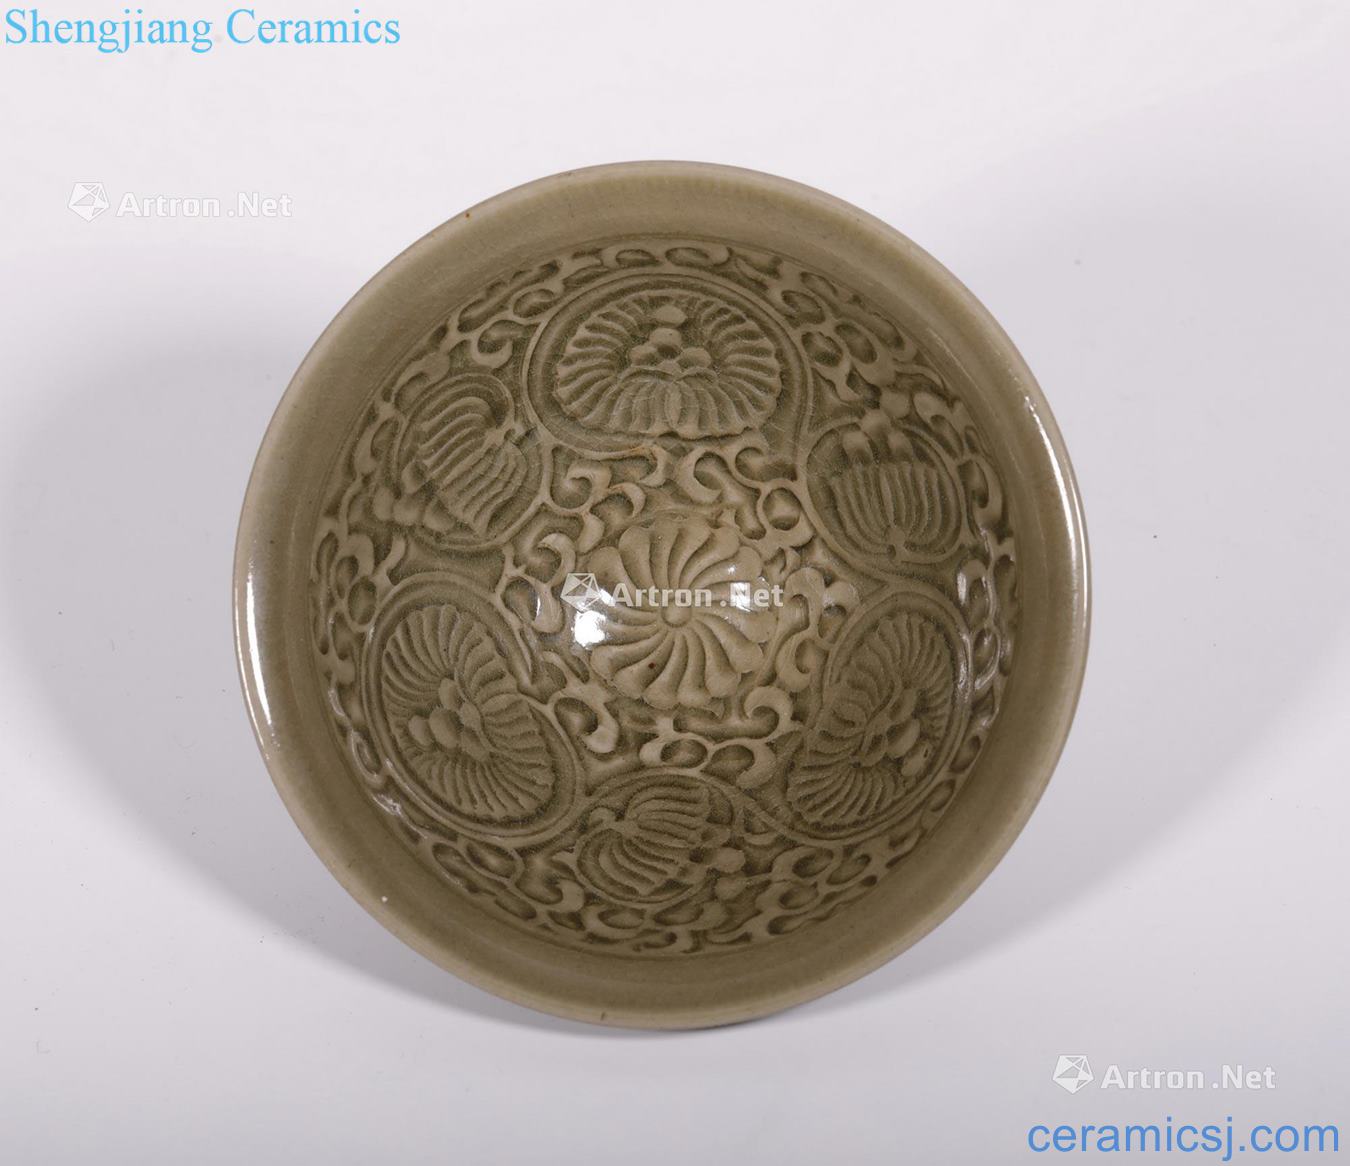 The song dynasty Yao state branch flowers grain lamp